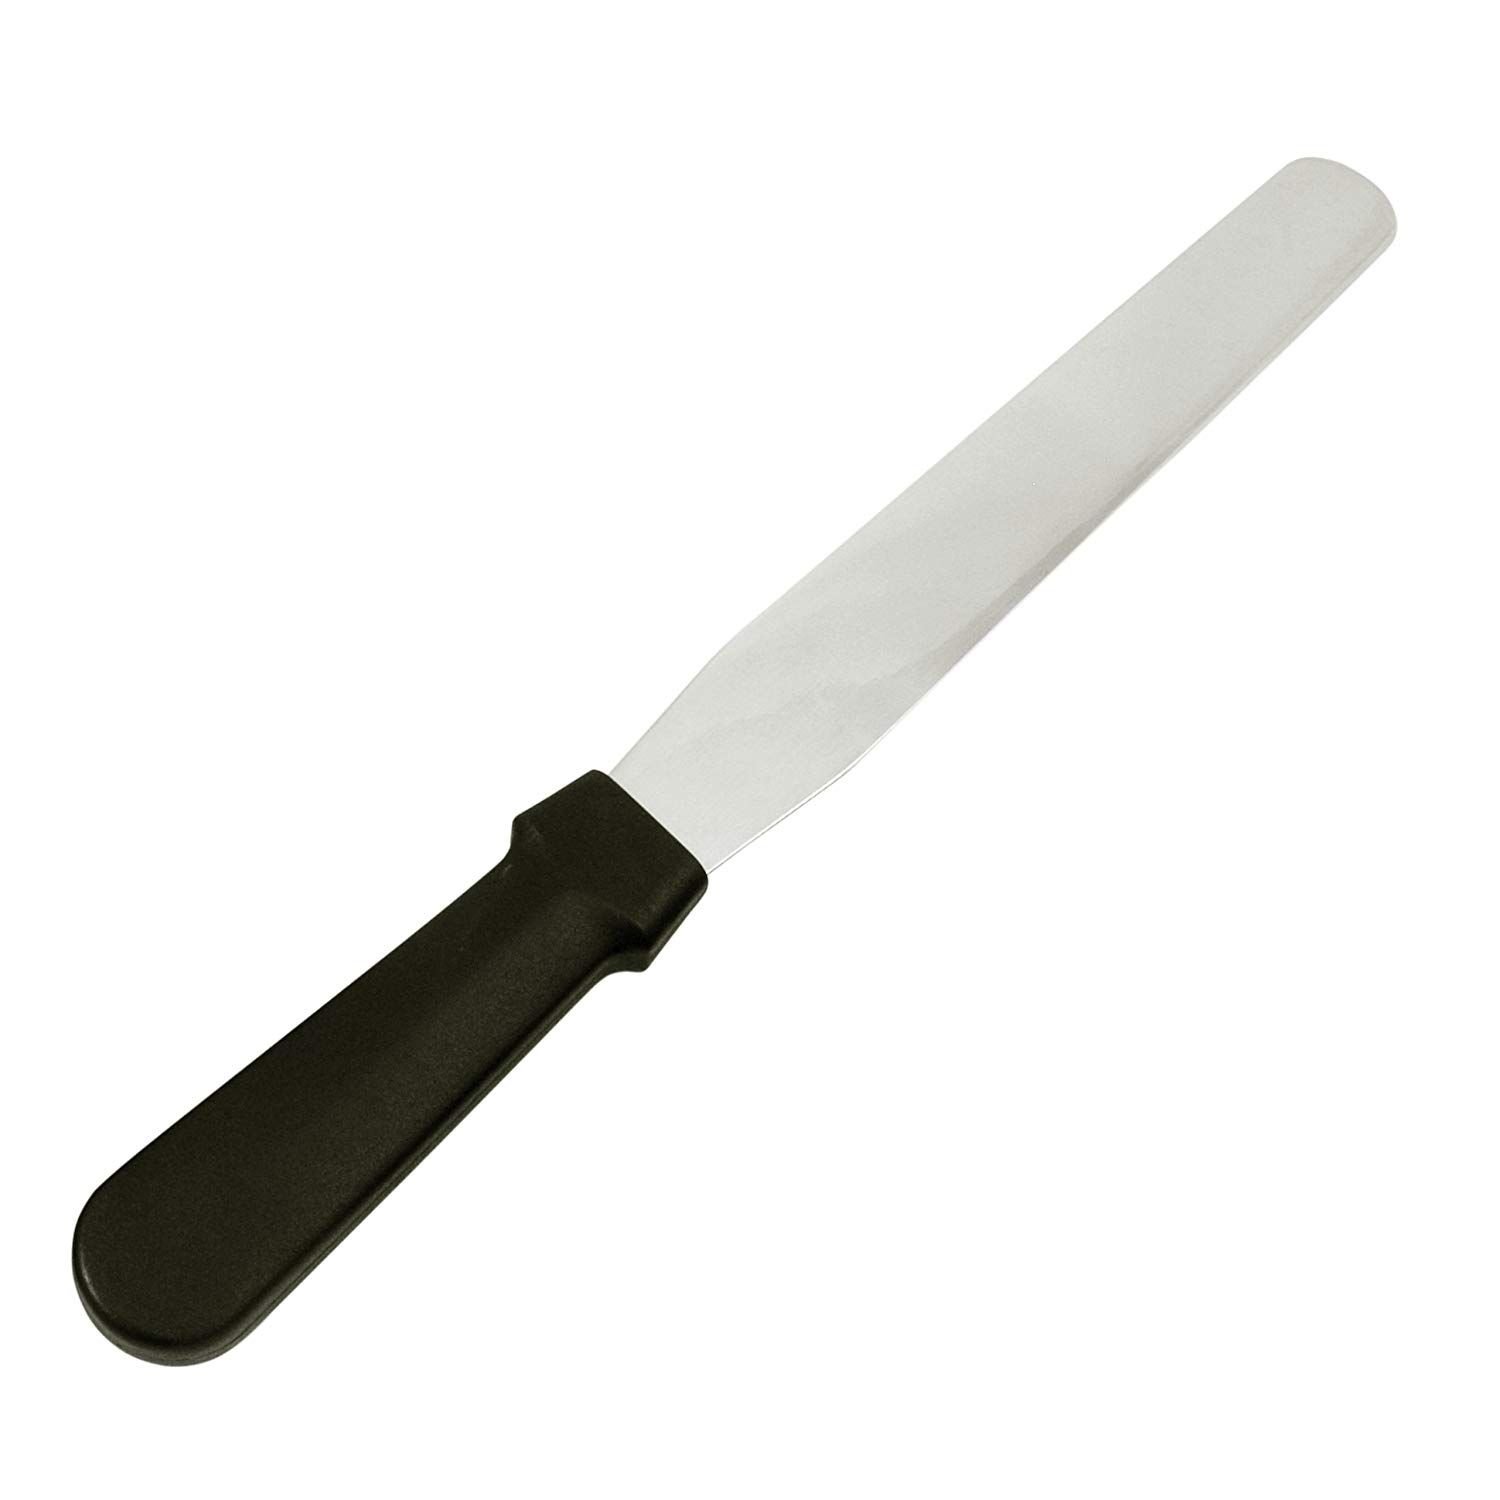 Icing Spatula Straight Stainless Steel SPAT-8S, Fat Daddio's